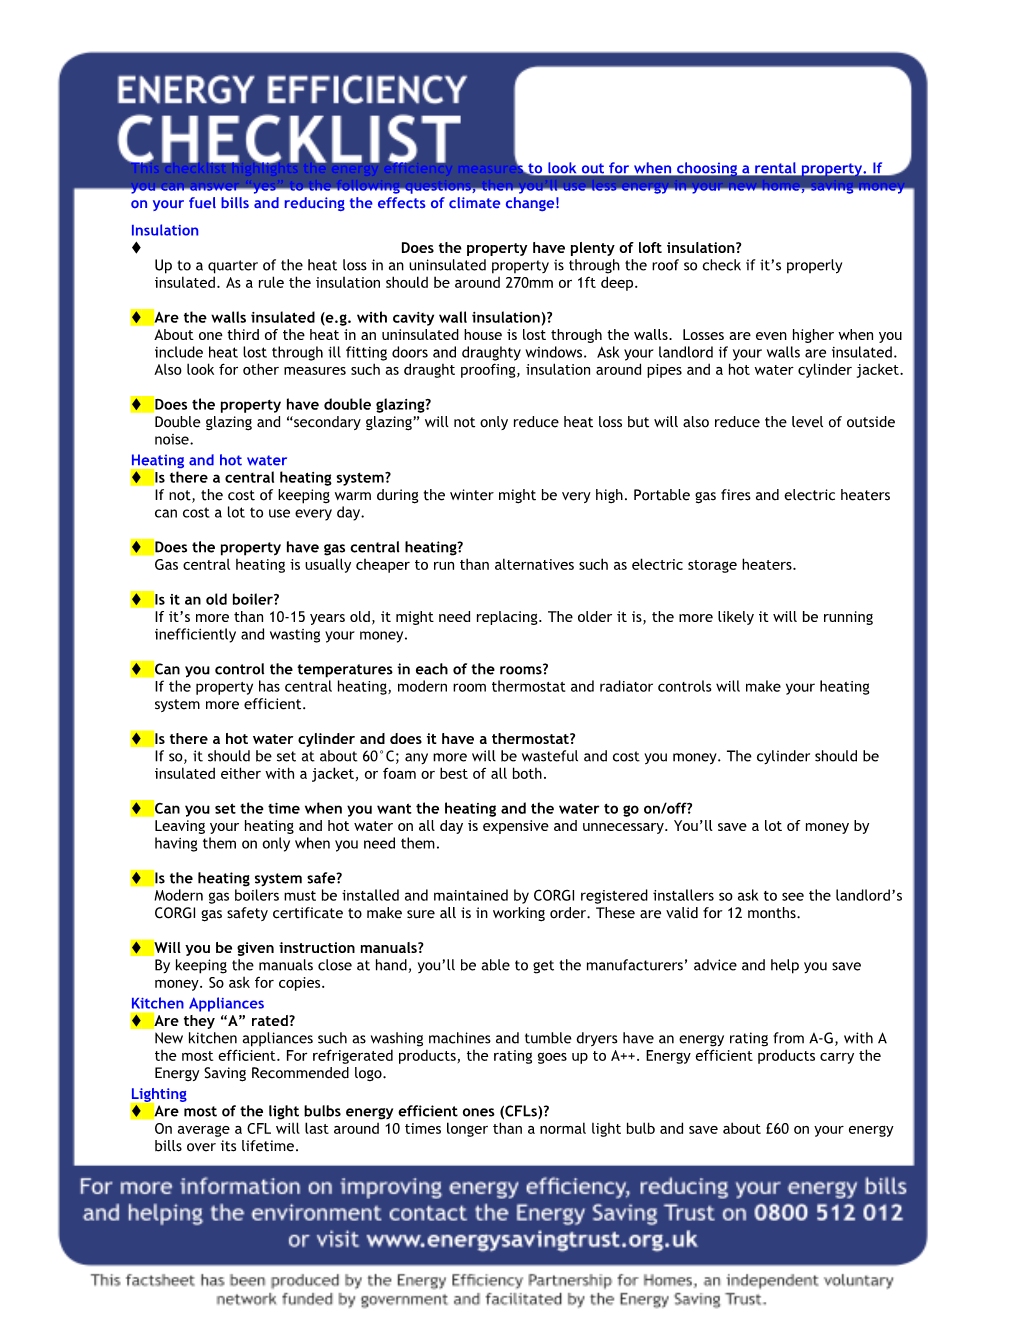 Energy Efficiency Checklist for Students